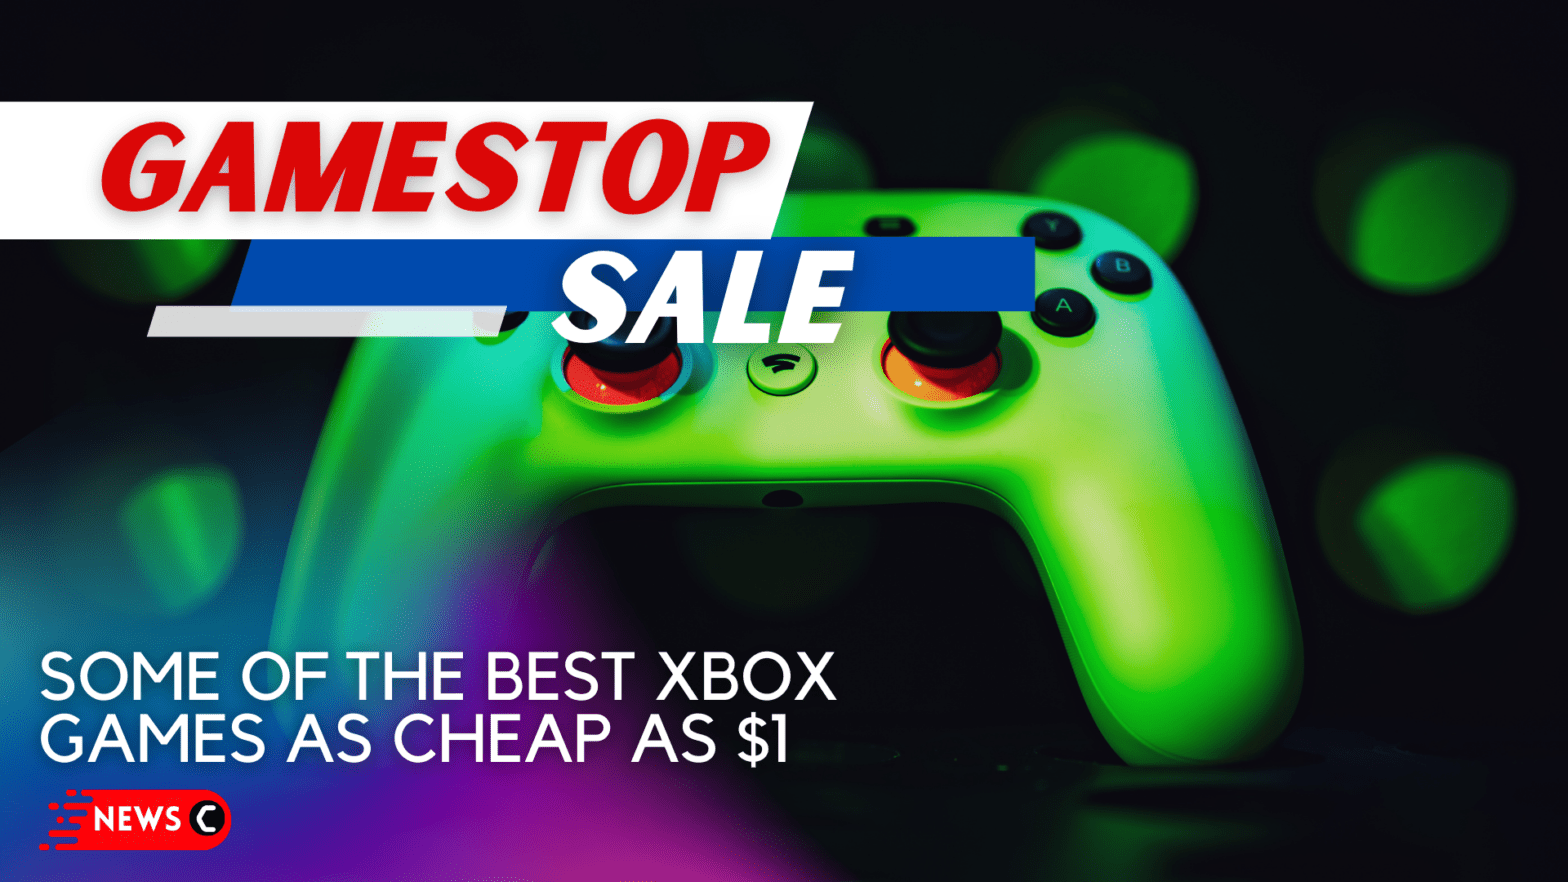 GameStop Makes Some of the Best Xbox Games as Cheap as $1